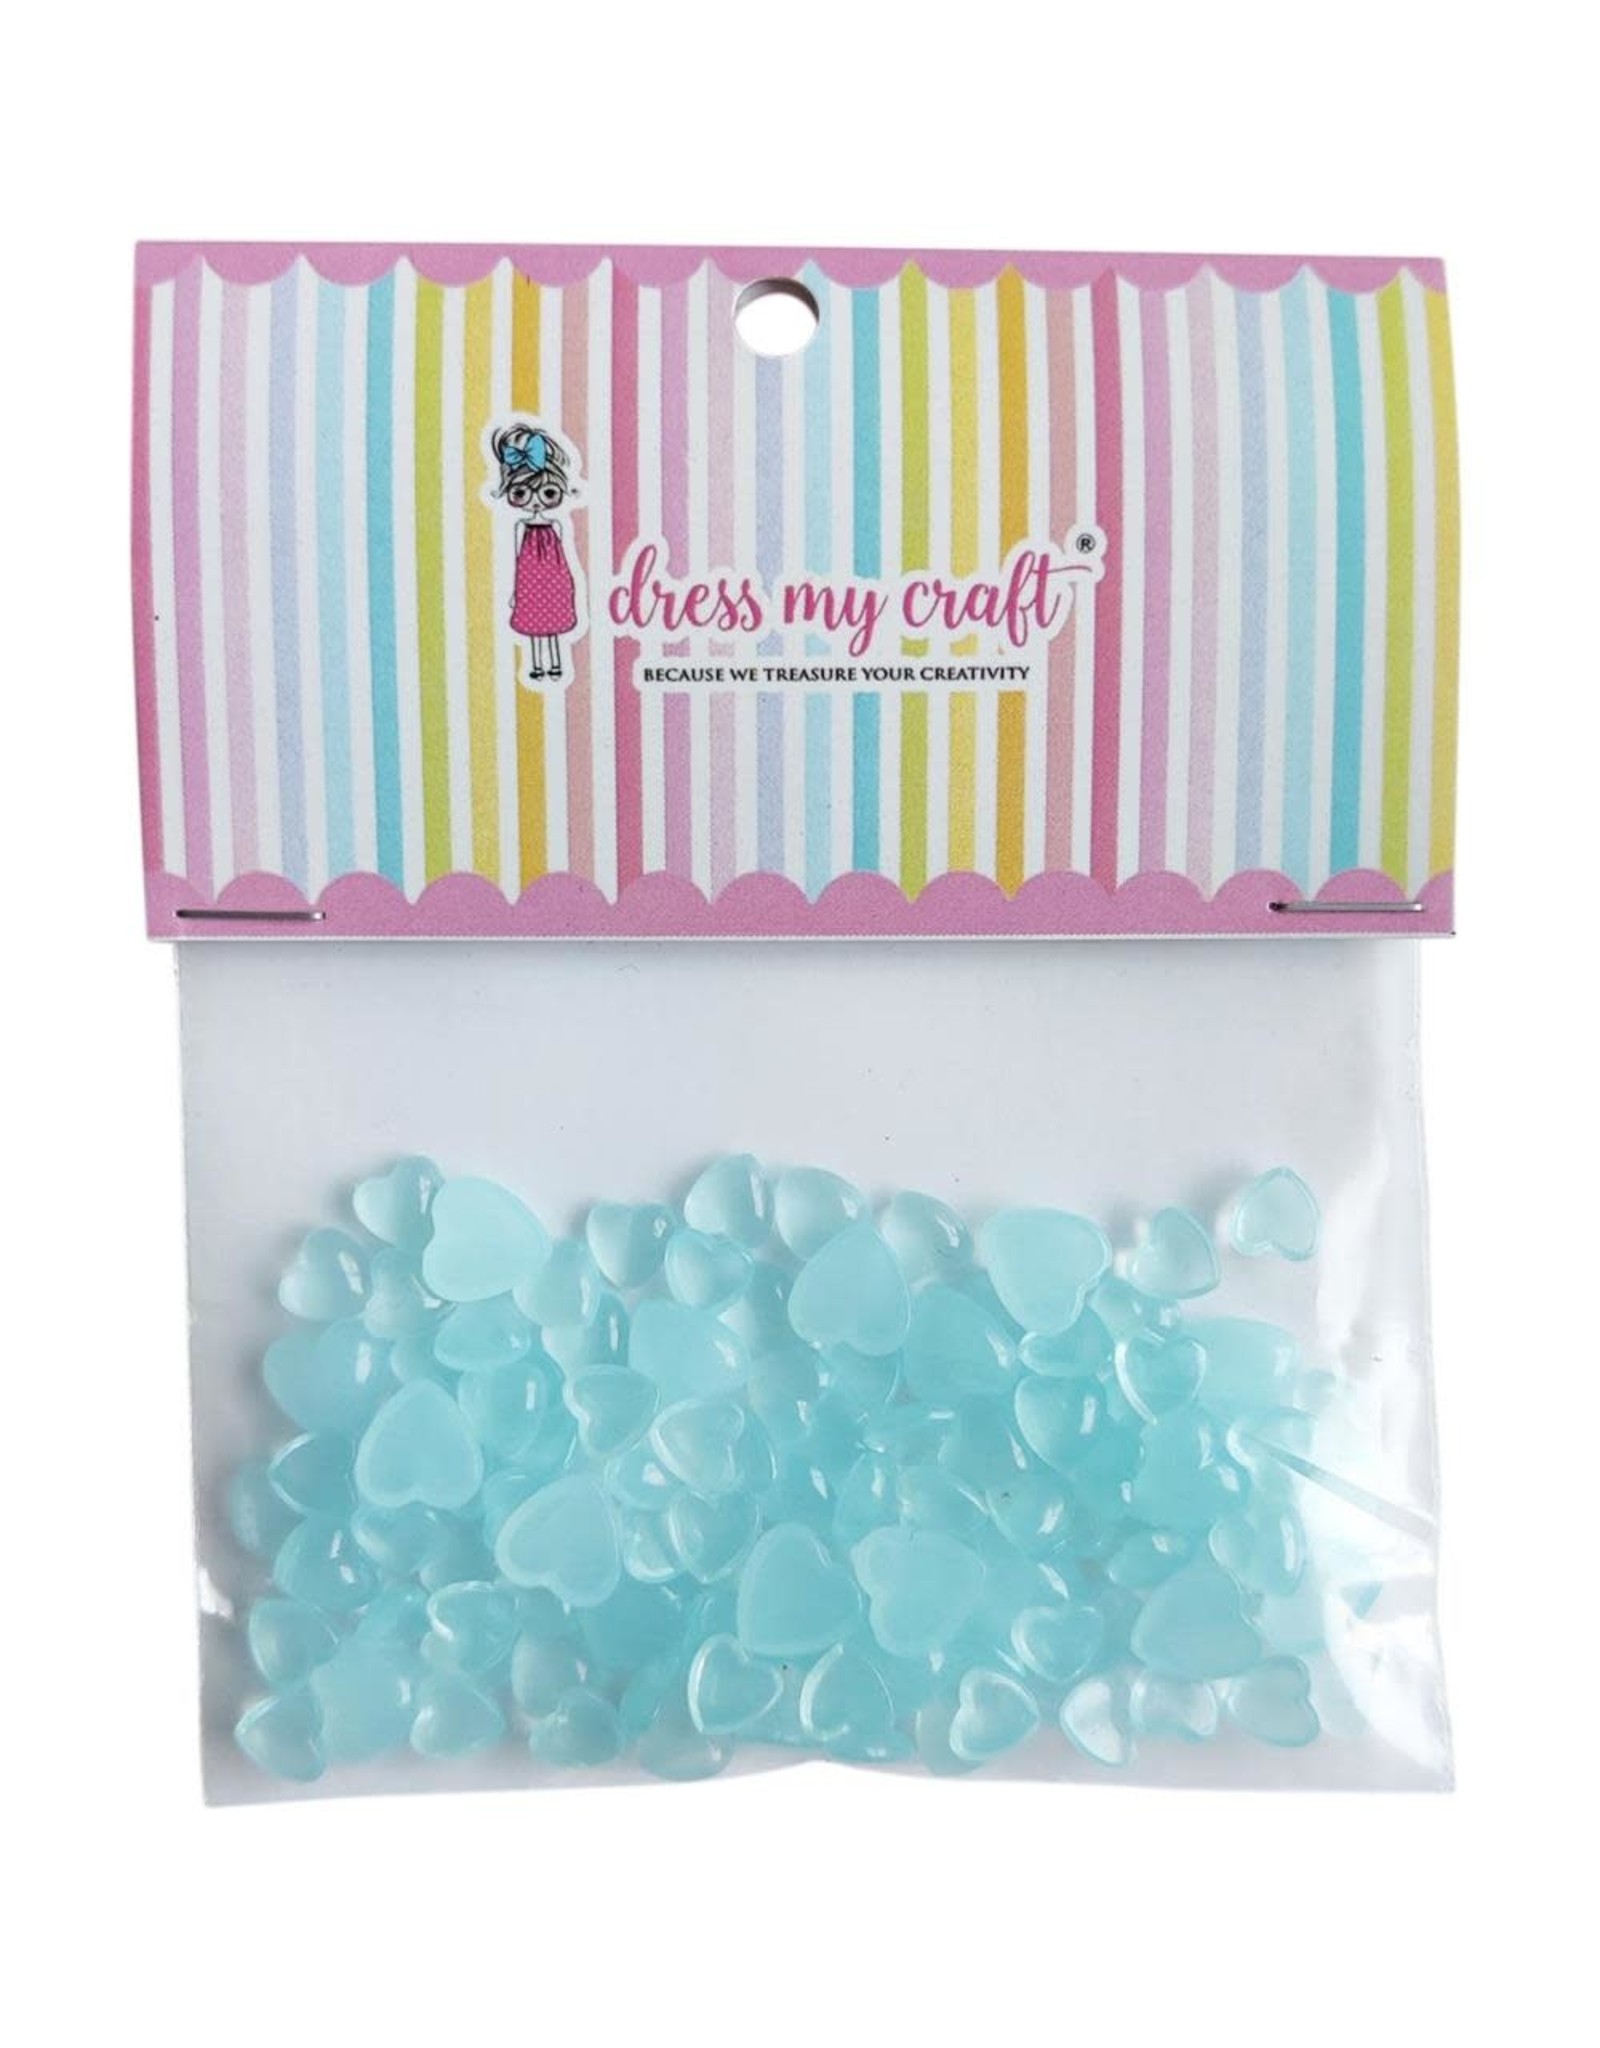 DRESS MY CRAFT WATER DROPLETS EMBELLISHMENTS - PASTEL BLUE HEARTS